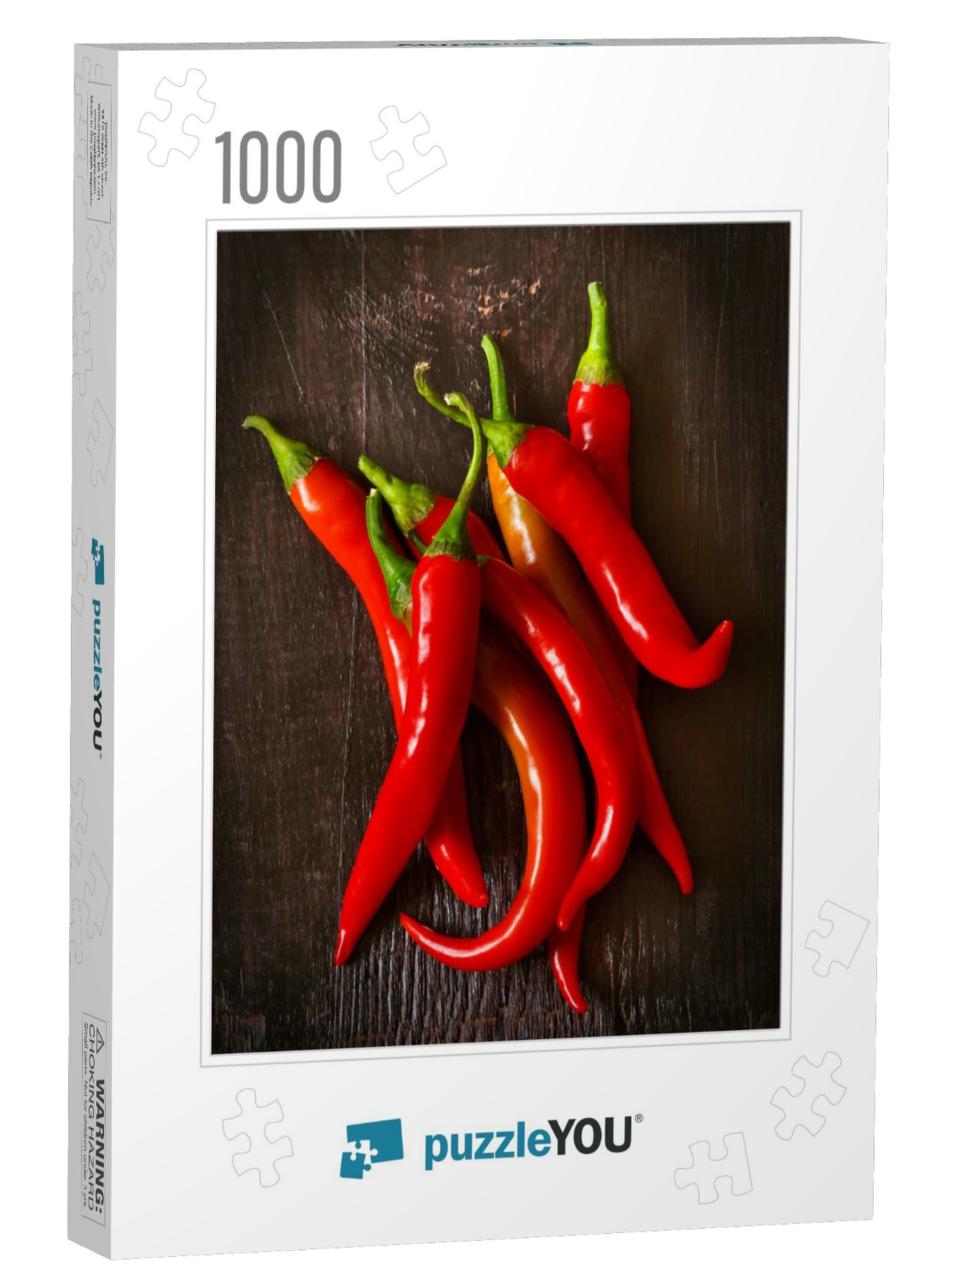 Red Chili on an Old Wooden Background... Jigsaw Puzzle with 1000 pieces